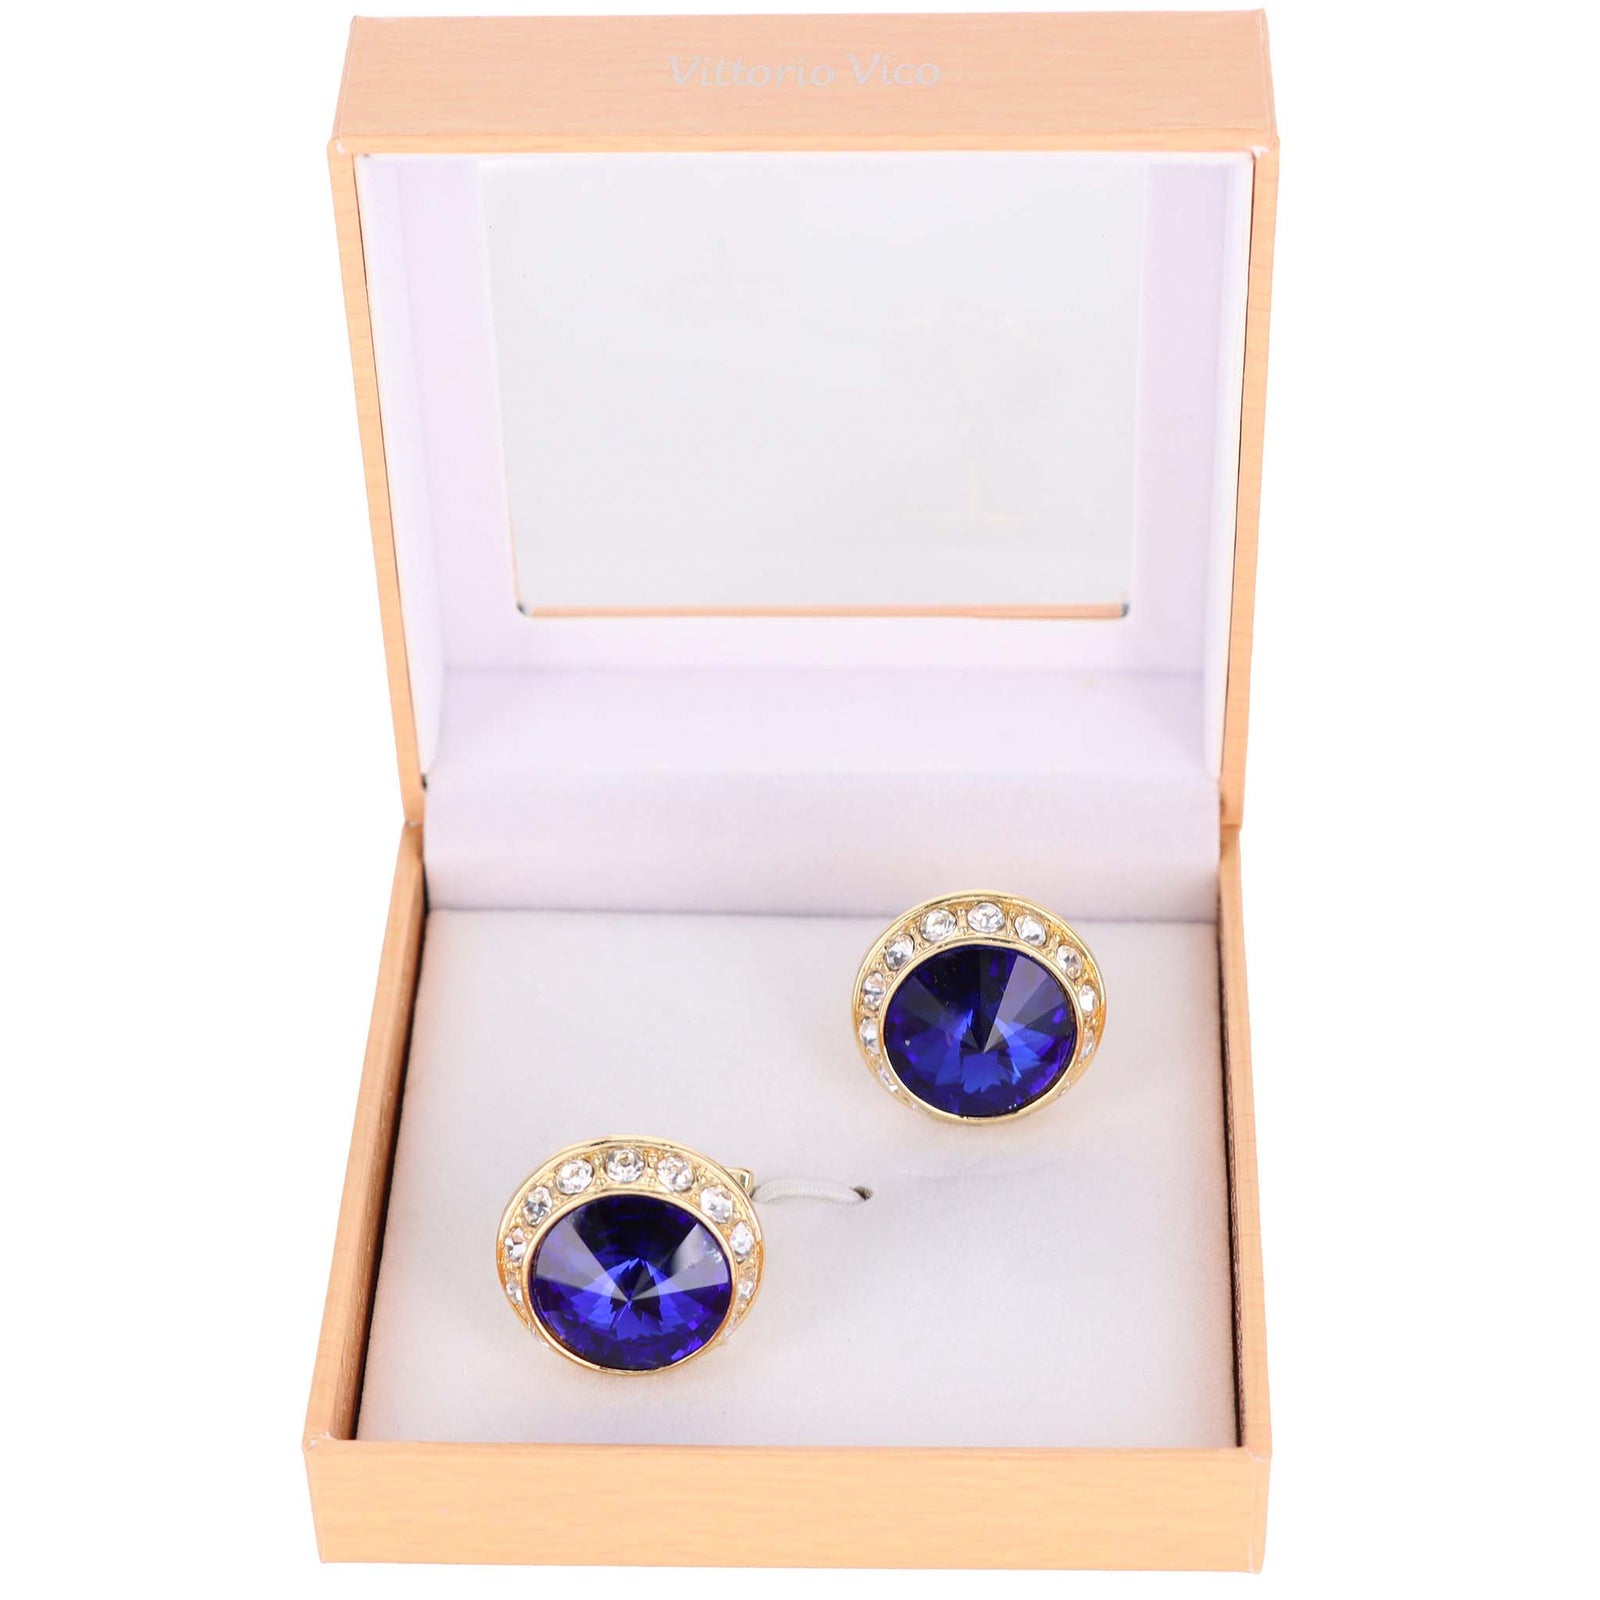 Vittorio Vico Gold & Silver Colorful Bling Cufflinks (CL15XX Series)